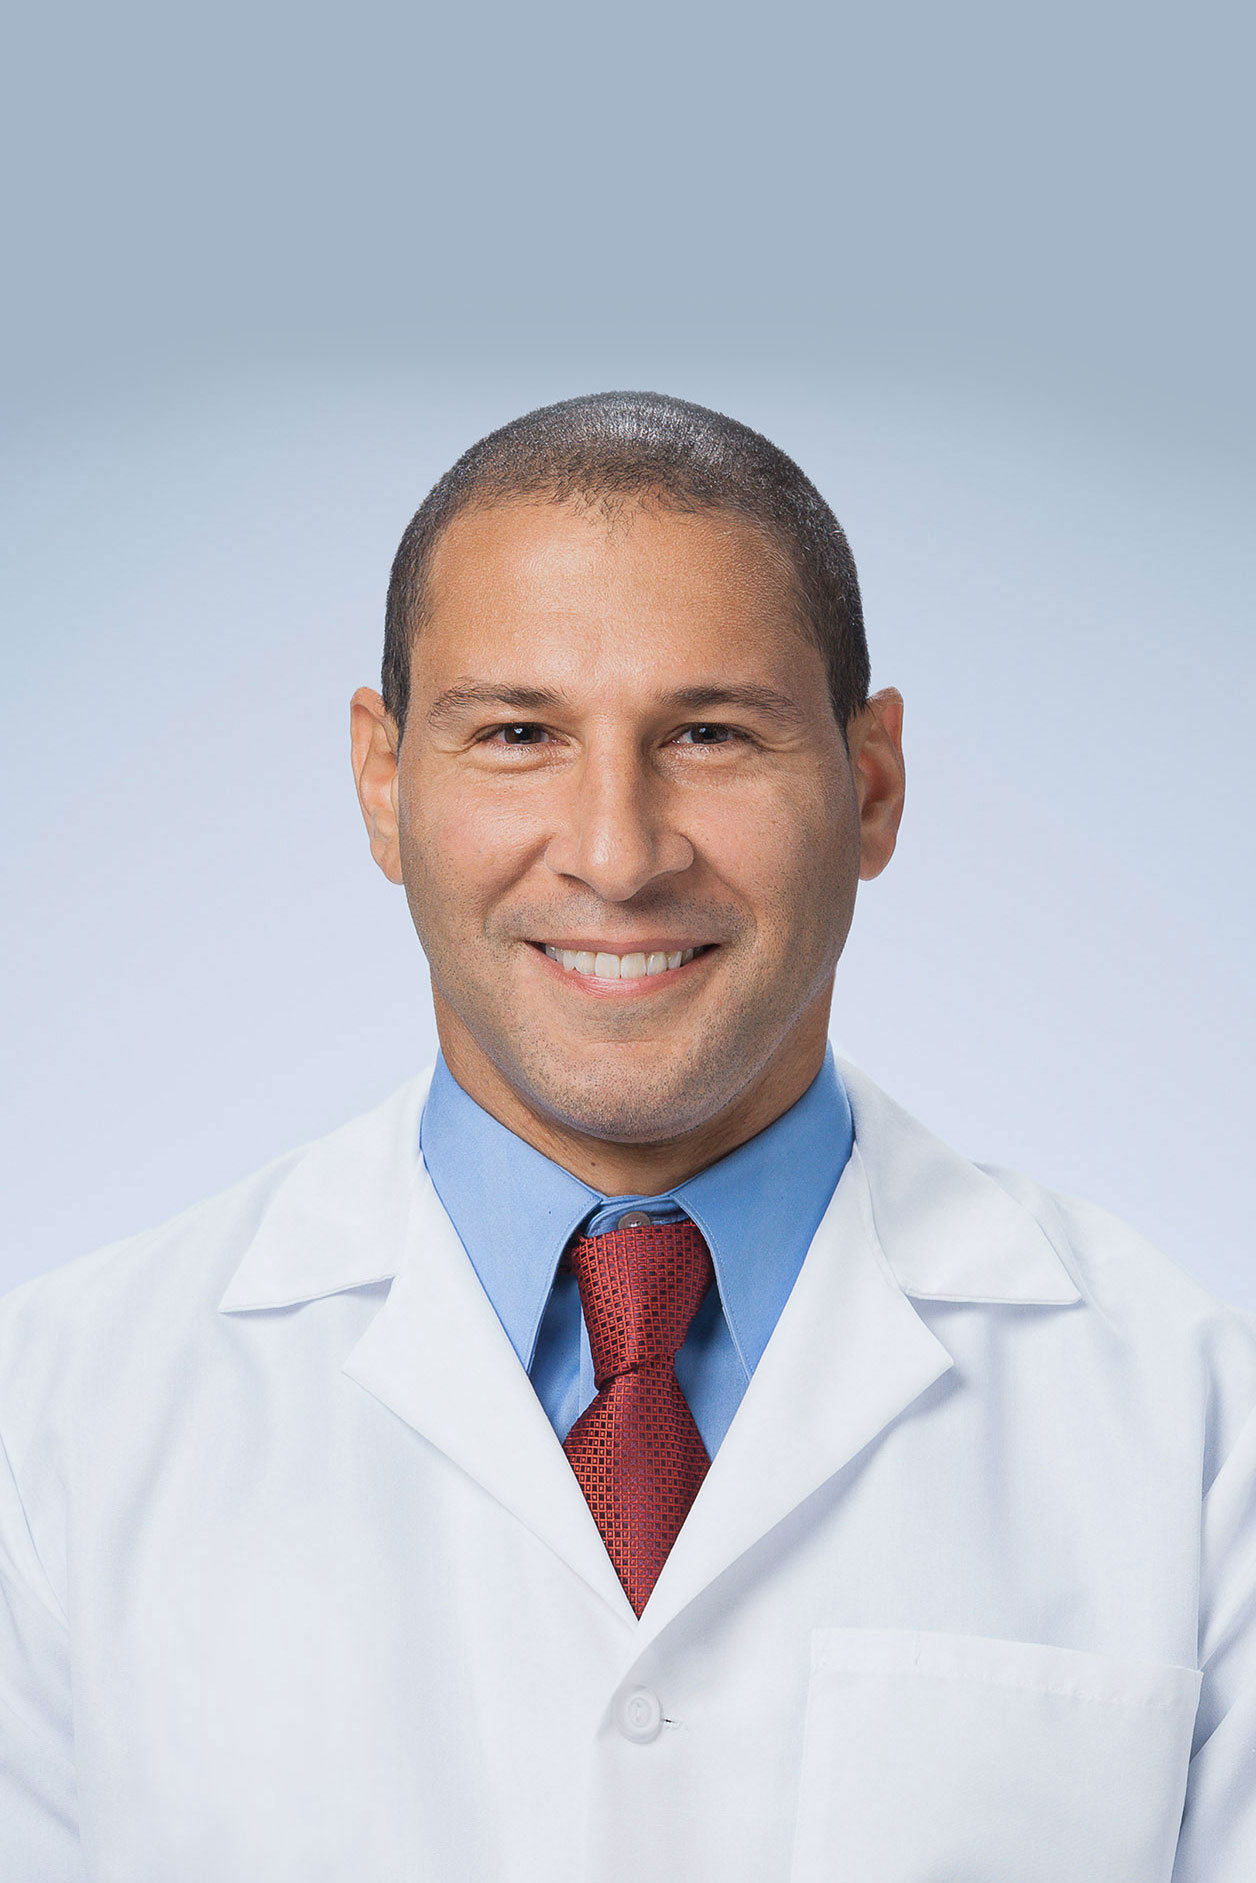 Dr Ramy Badawi is an interventional cardiologist who specializes in catheter-based procedures for the treatment of coronary artery disease, heart valve disease and peripheral arterial disease.